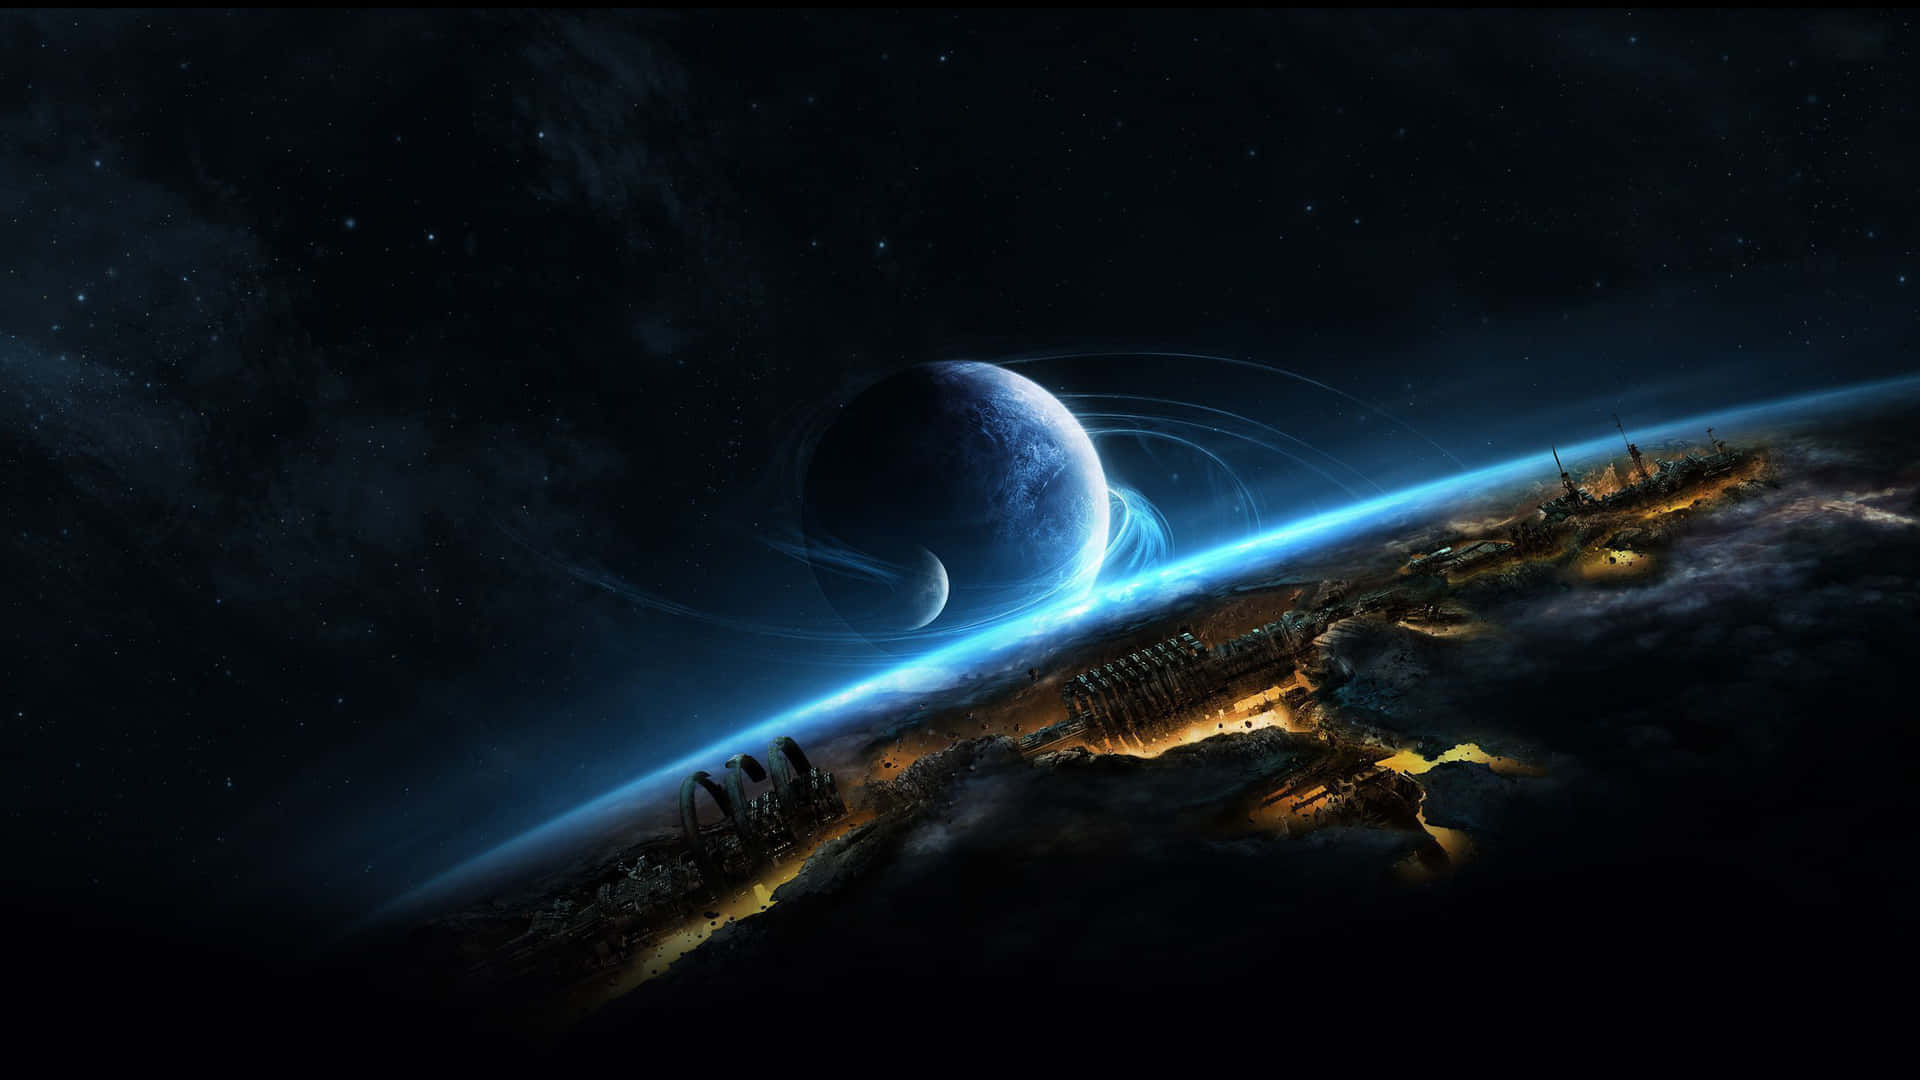 2440x1440 Dota 2 Background The Galaxy With Two Planets Background